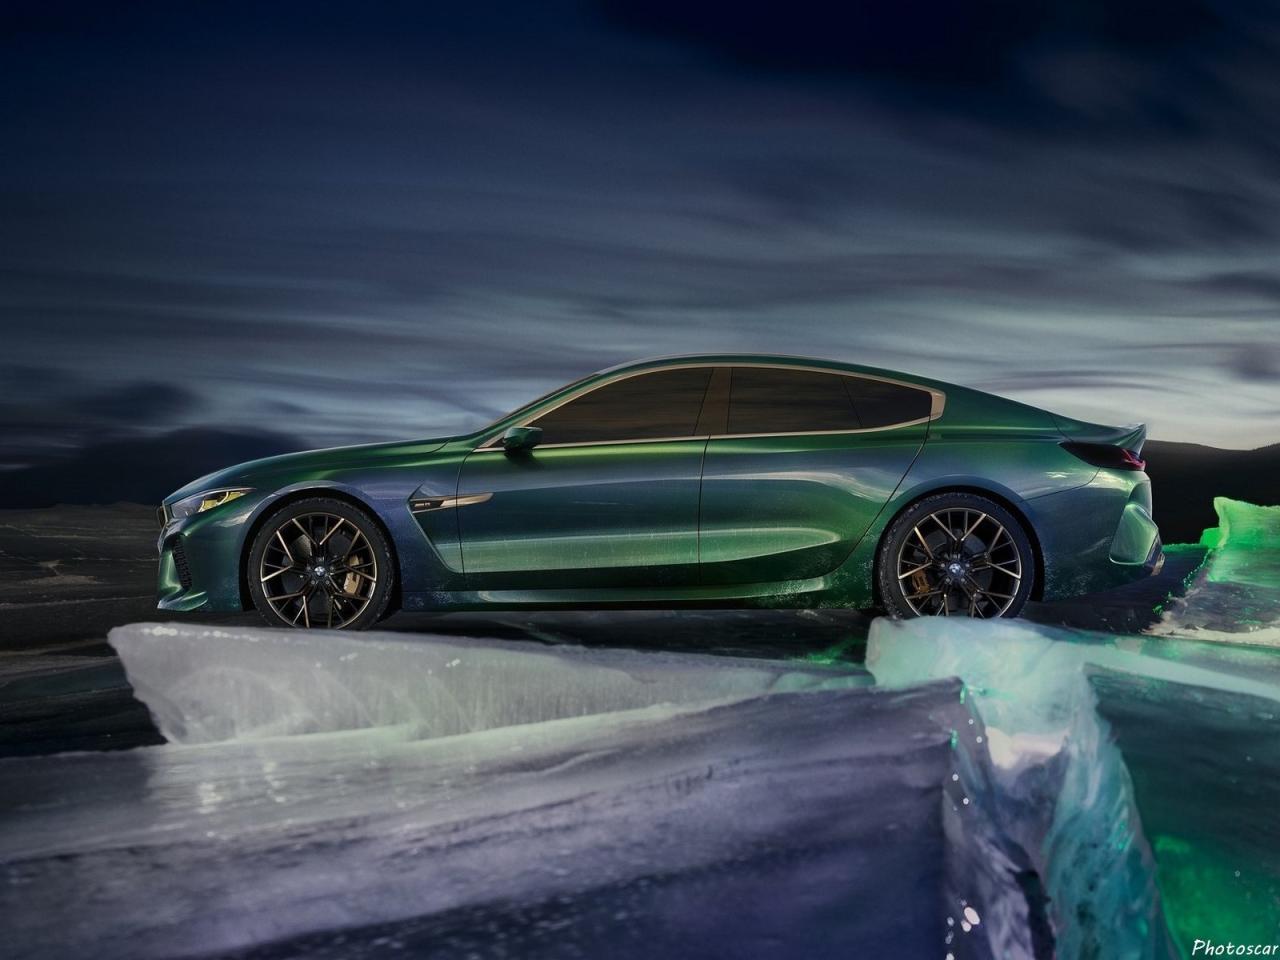 A Stylish And Sporty Ride: The 2018 BMW M8 Gran Coupe Concept